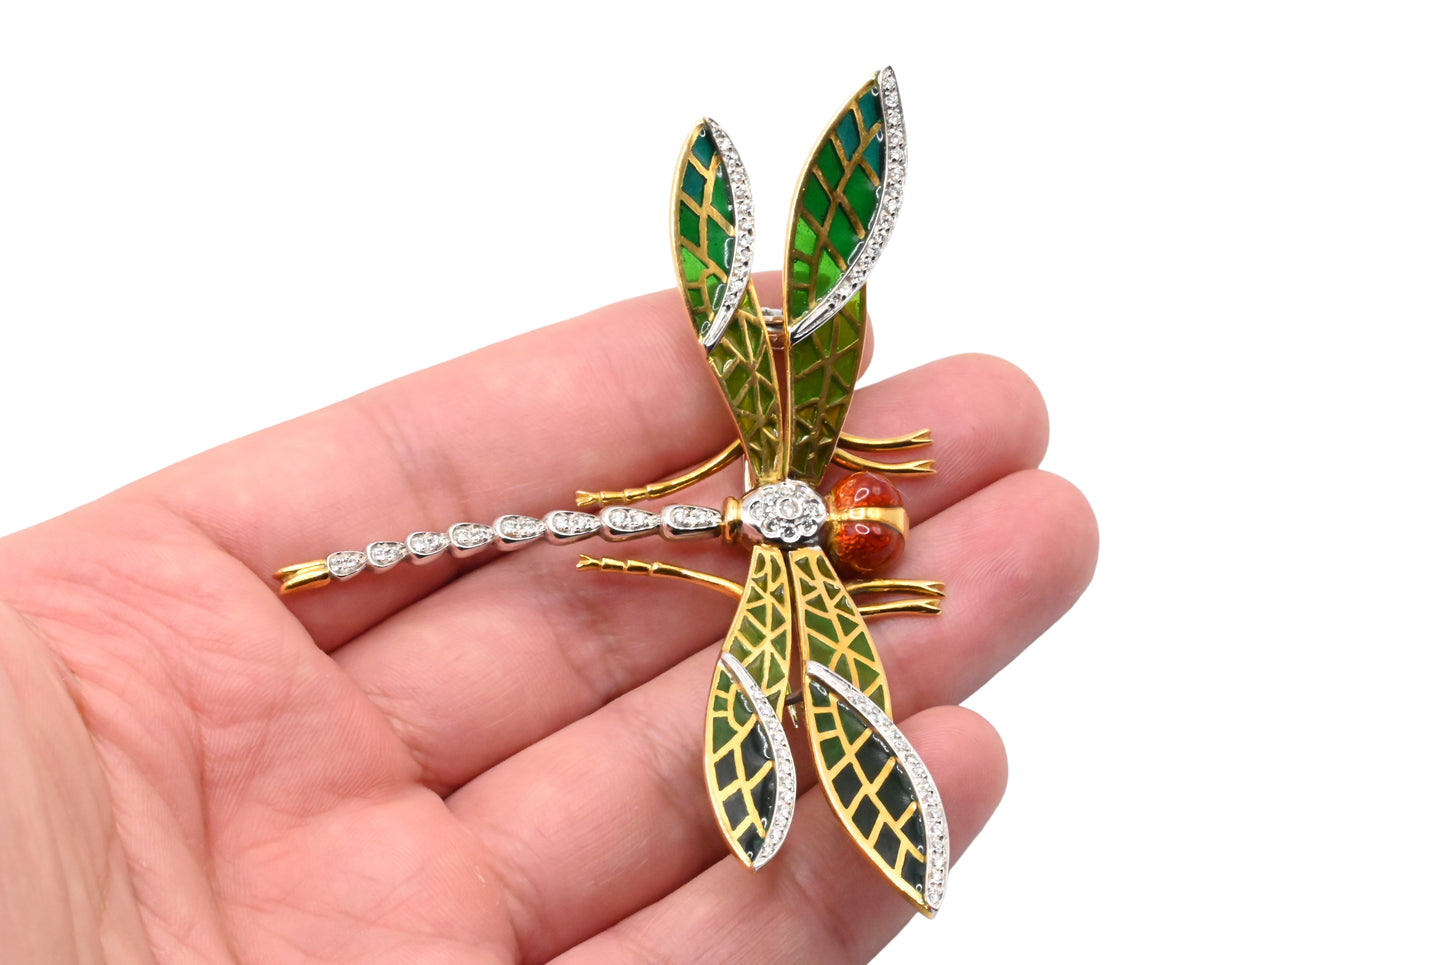 14K Yellow Gold Dragonfly Brooch with Precious Stones